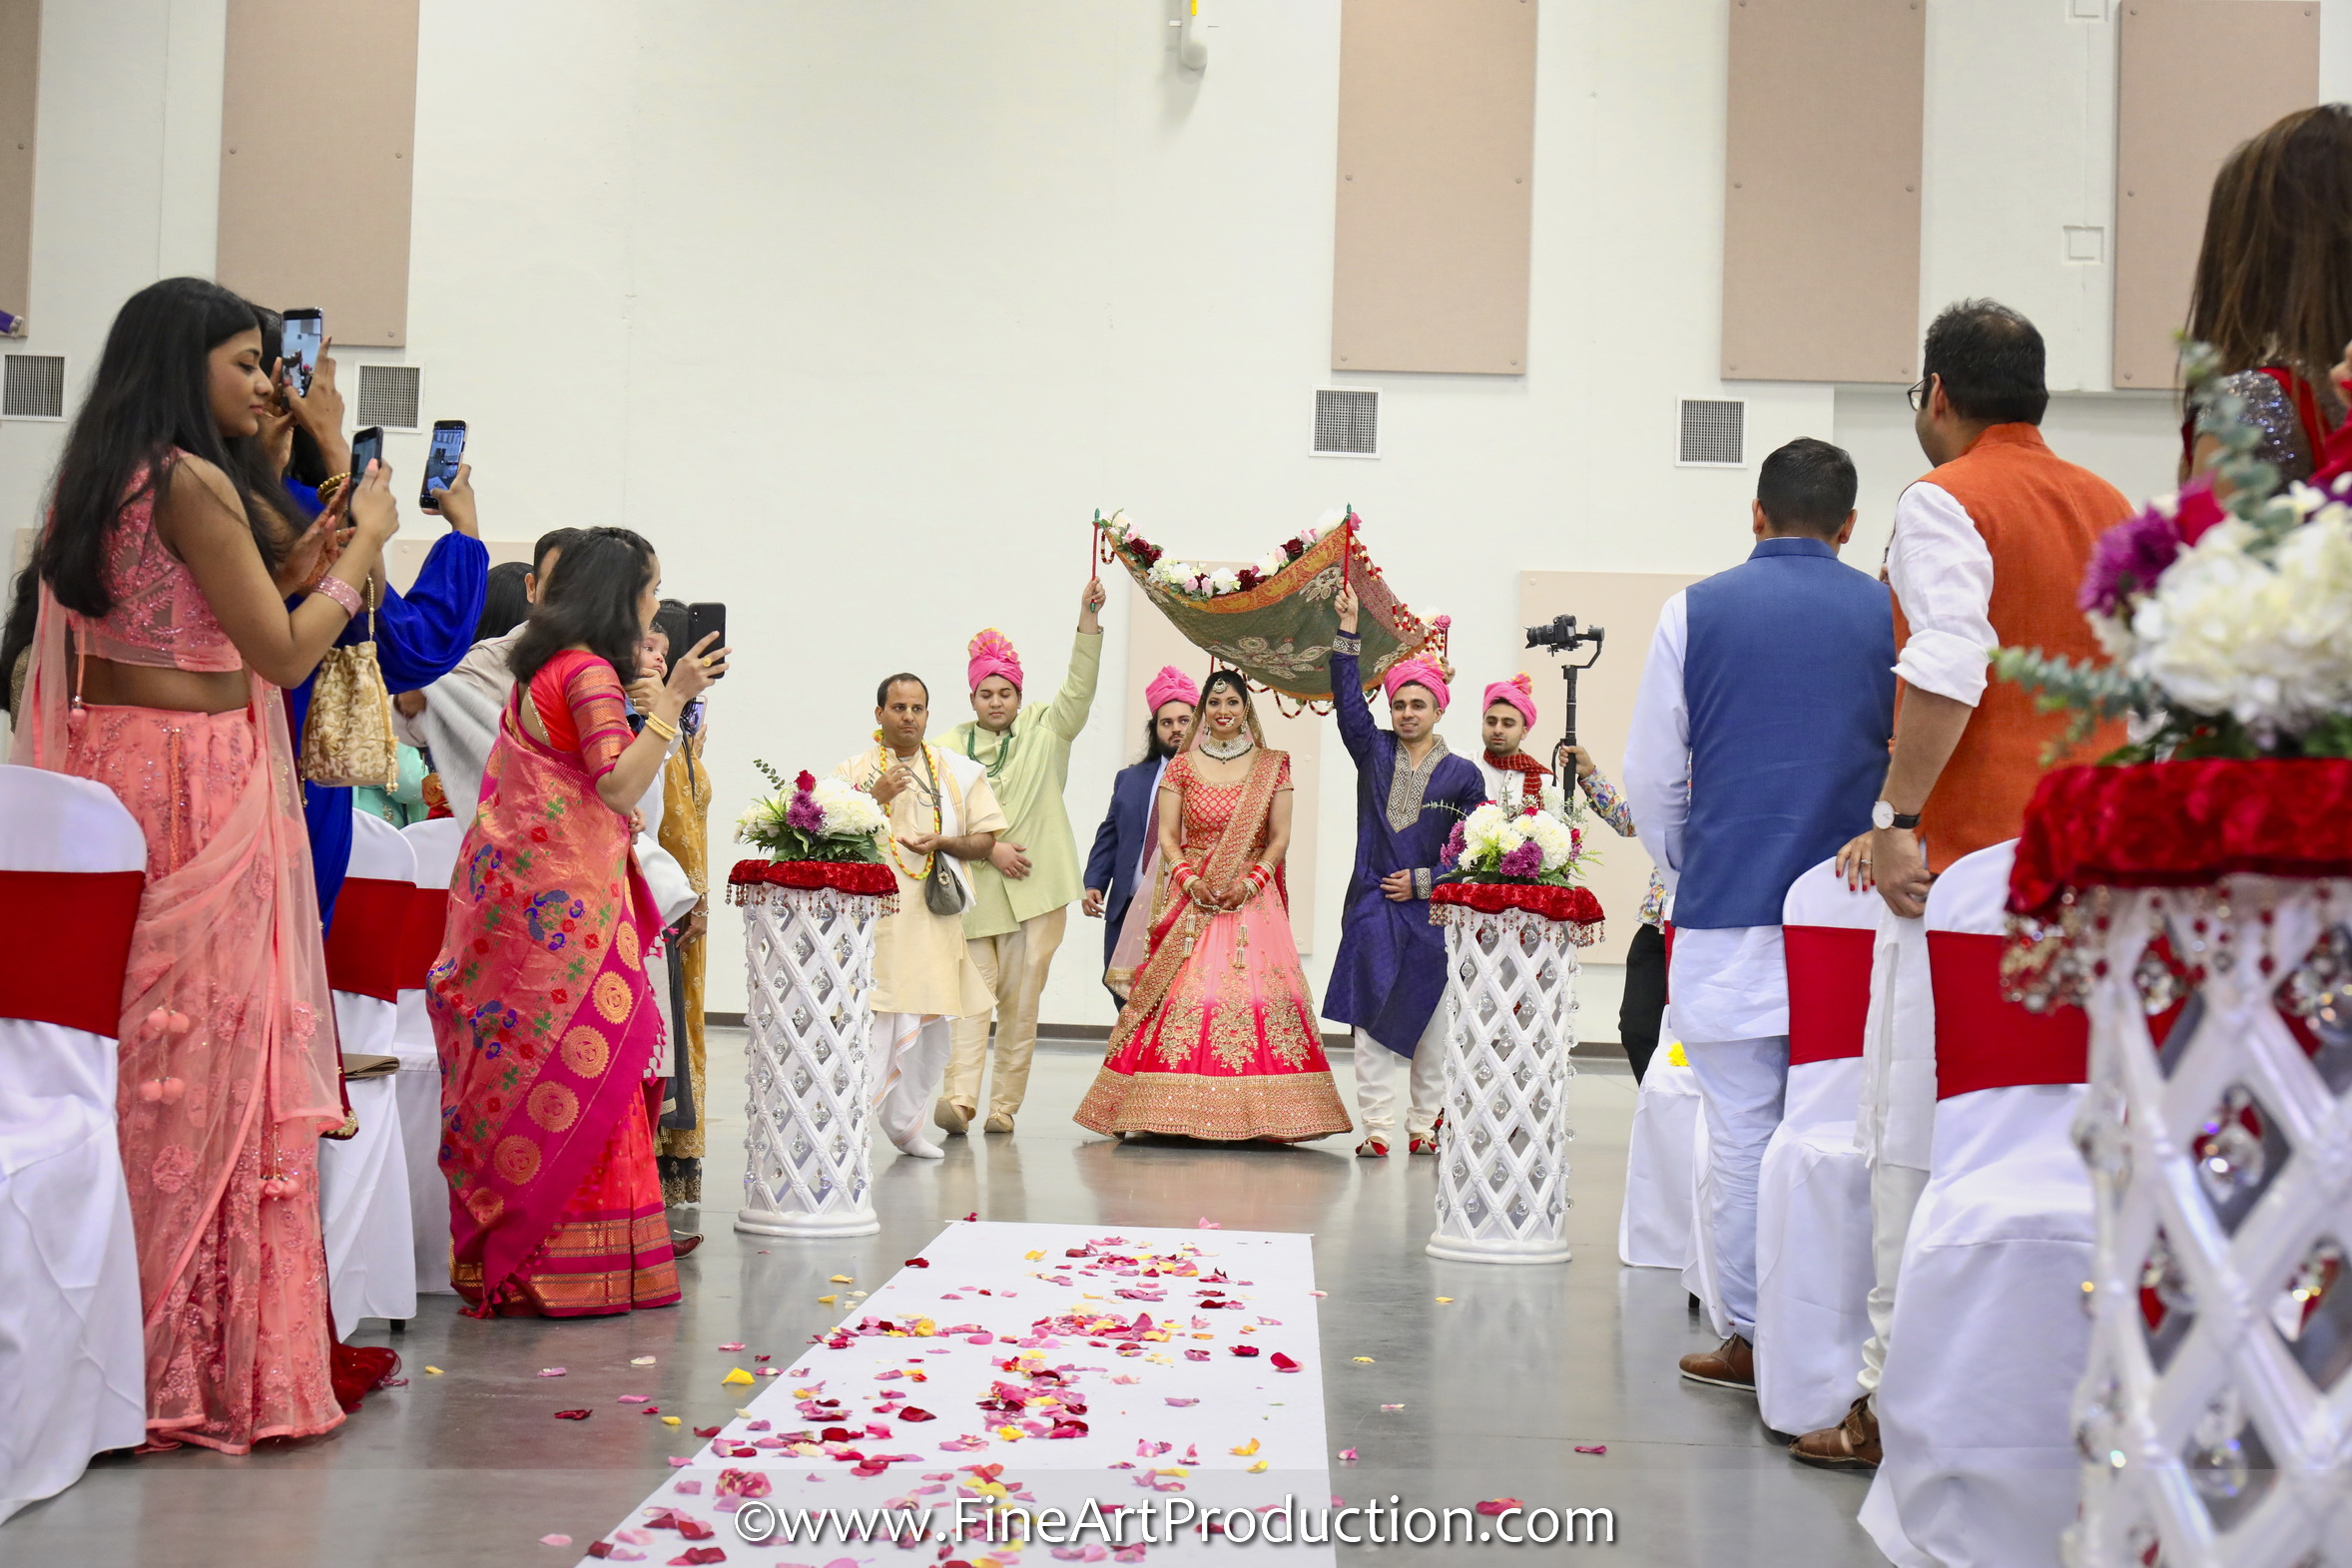 columbia-county-exhibition-center-wedding-augusta-marriott-convention-center-reception-punjabi-sindhi-wedding-rituals-indian-jewllery-bridal-shoes-wed  by Indian Wedding Photographer